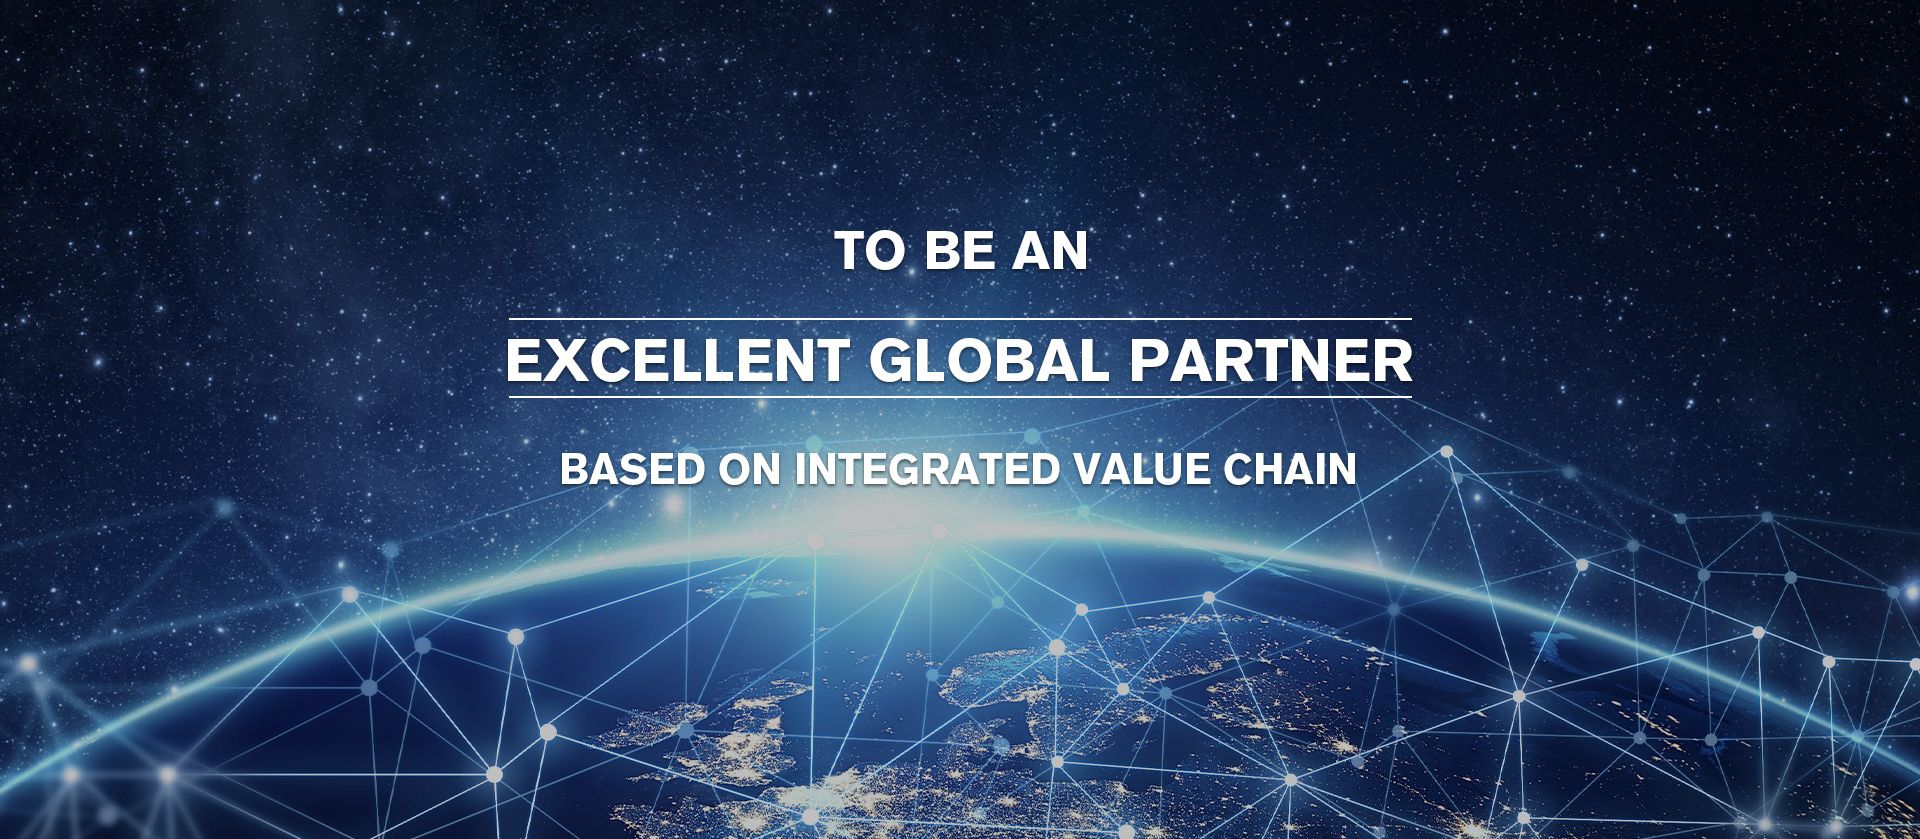 To be an excellent global partner based on integrated value chain